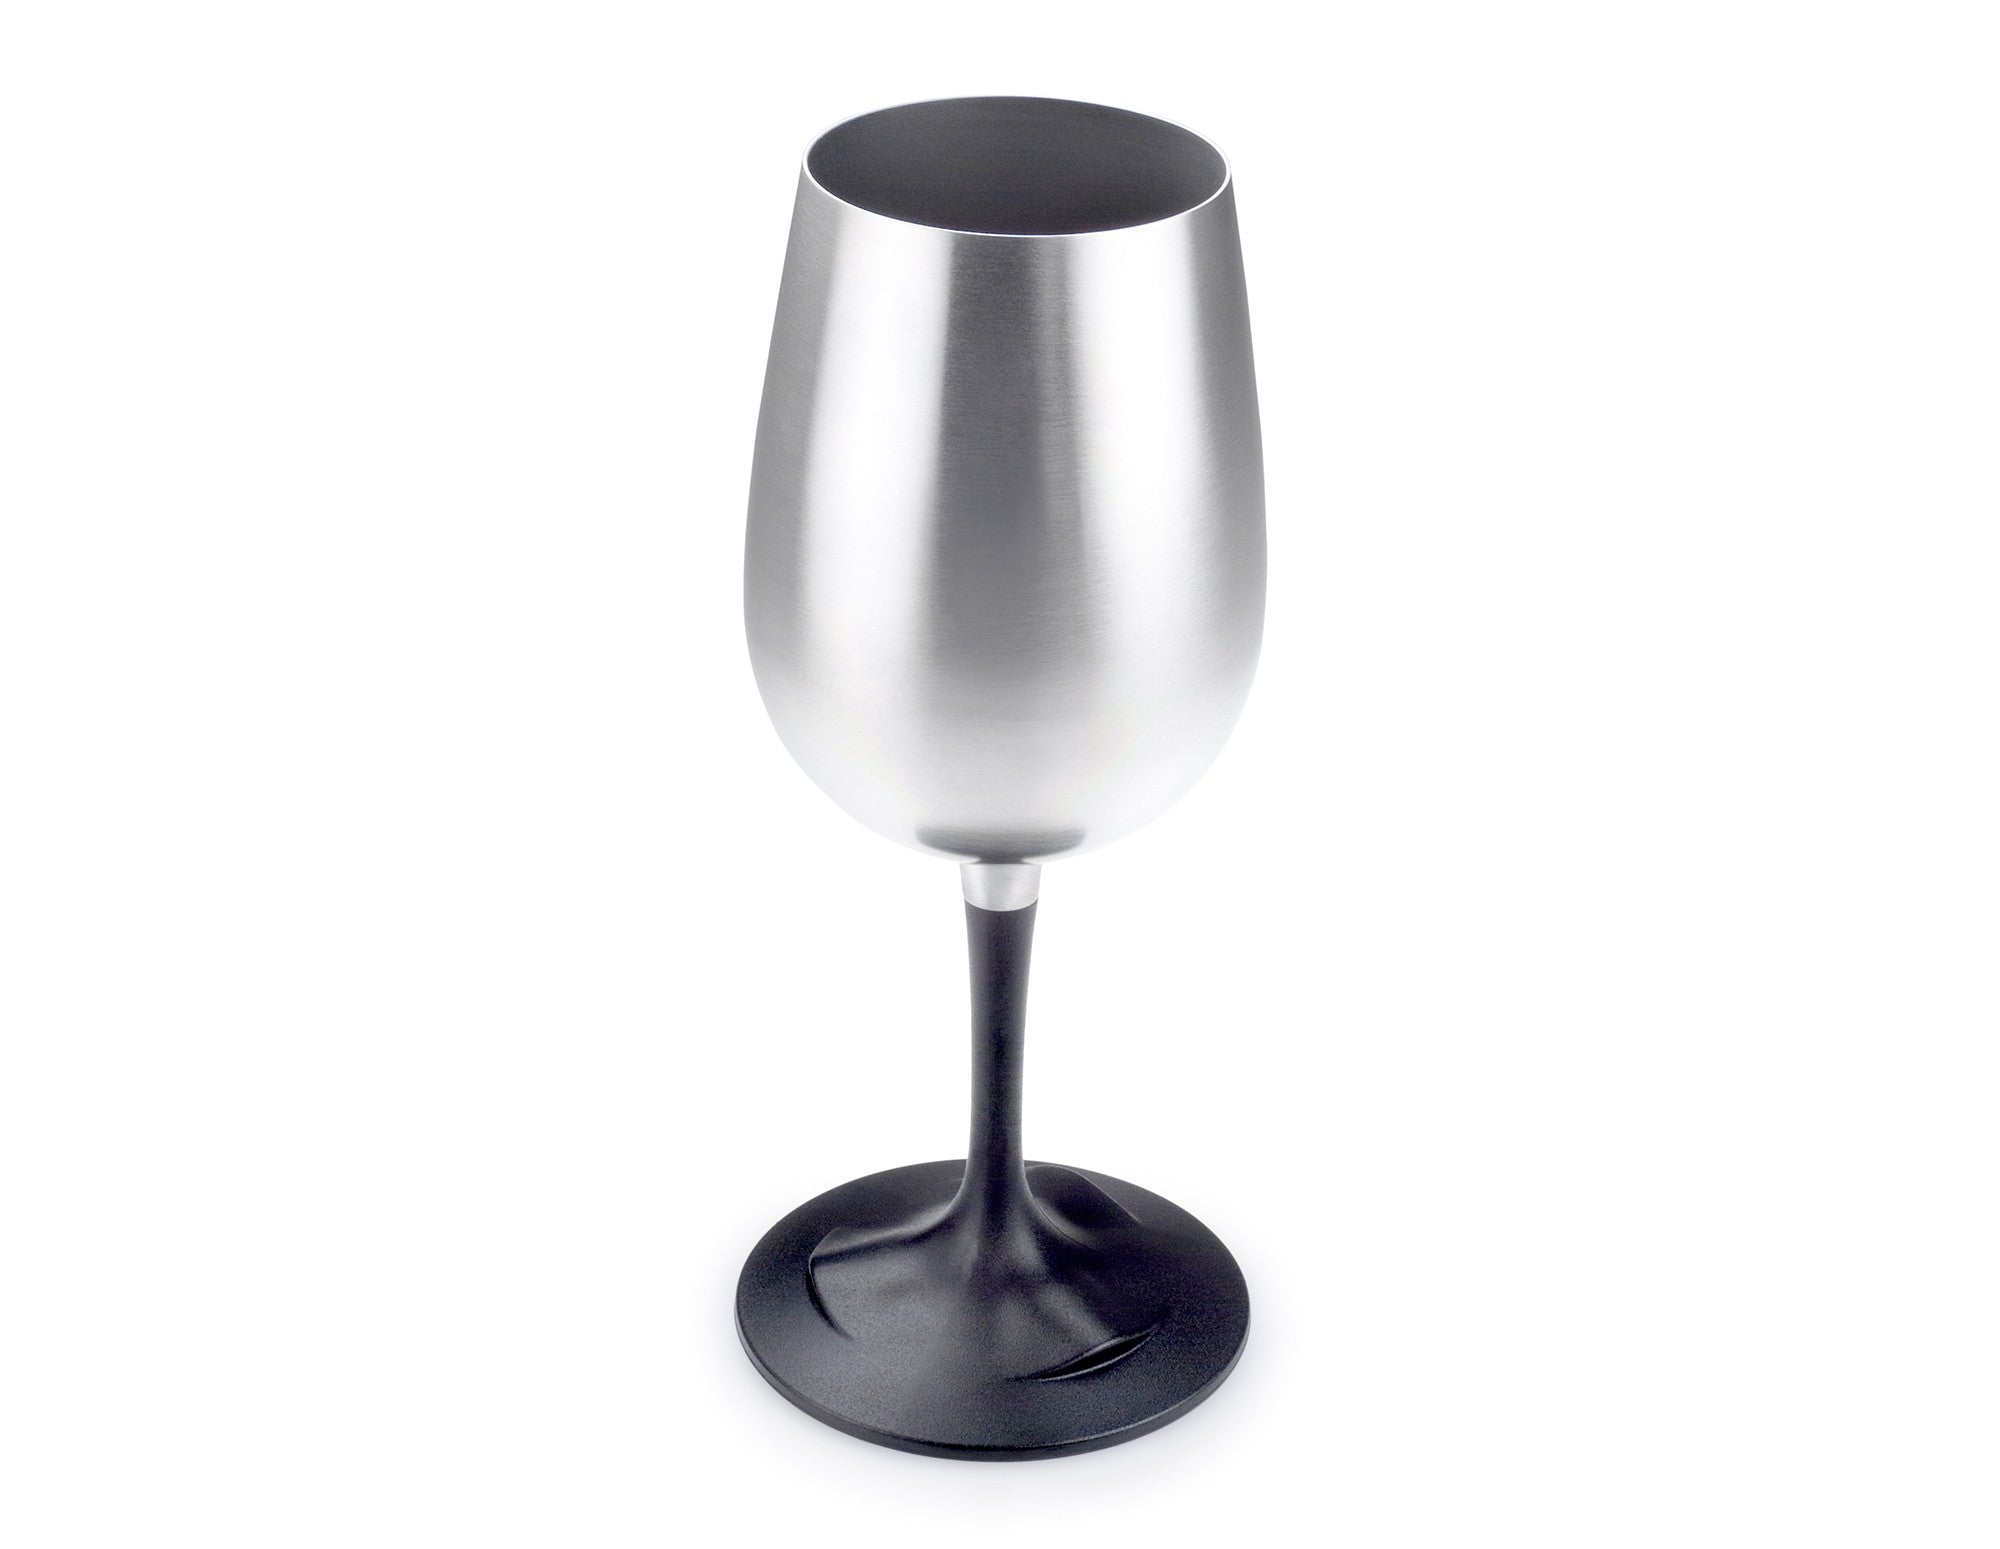 Stainless Steel Wine Flutes, Champagne Steel Glasses